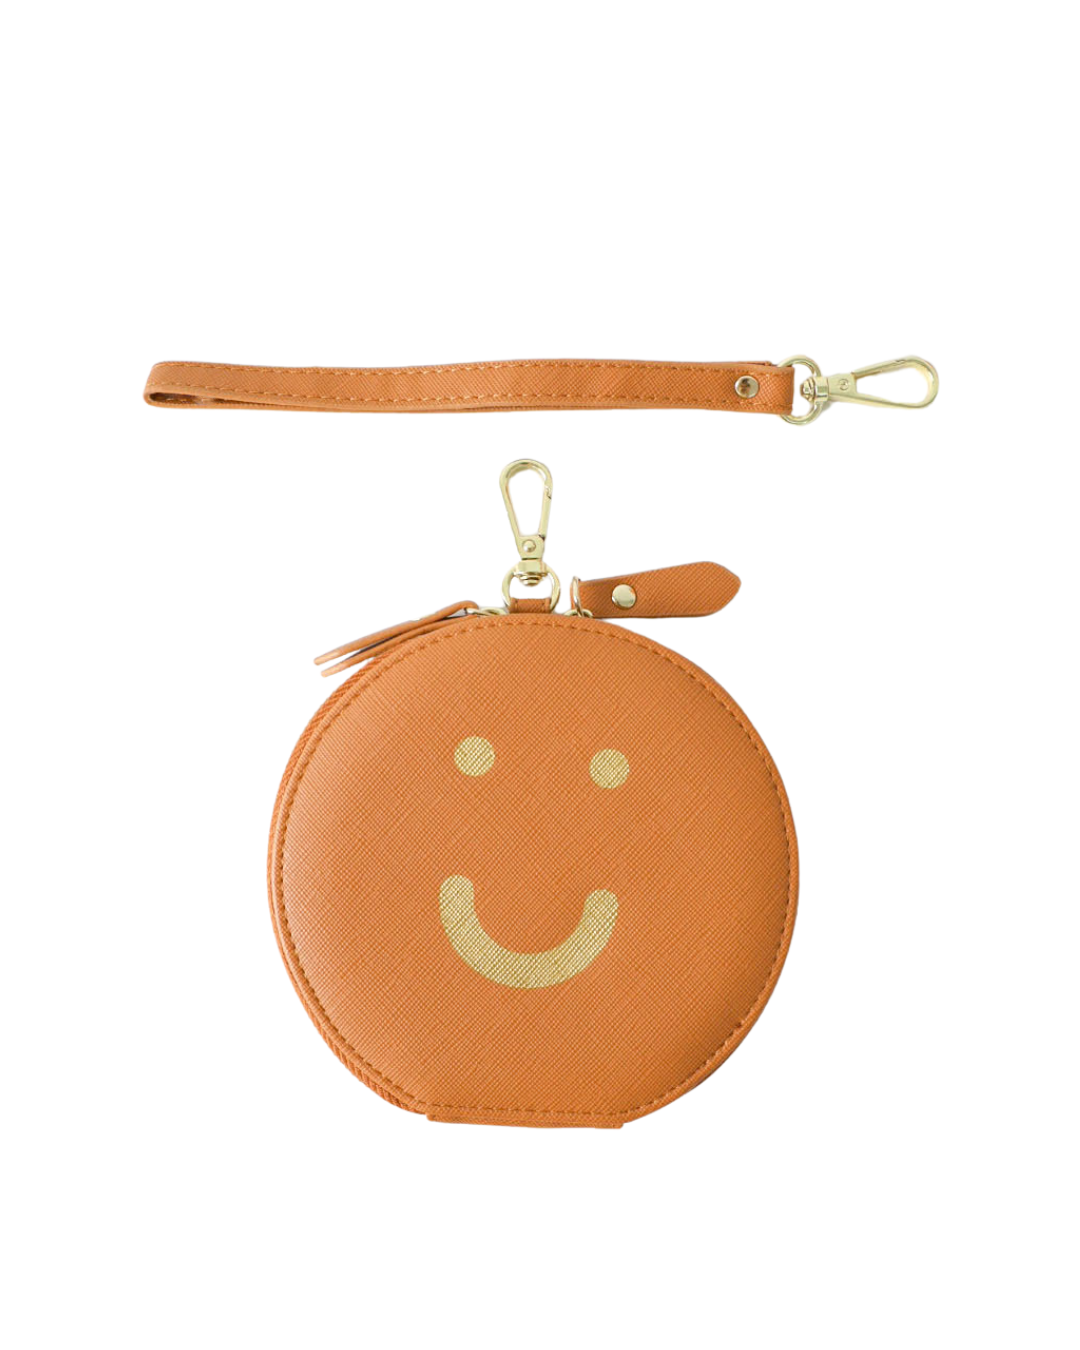 Signature Smile Carry-All - Caramel Brown